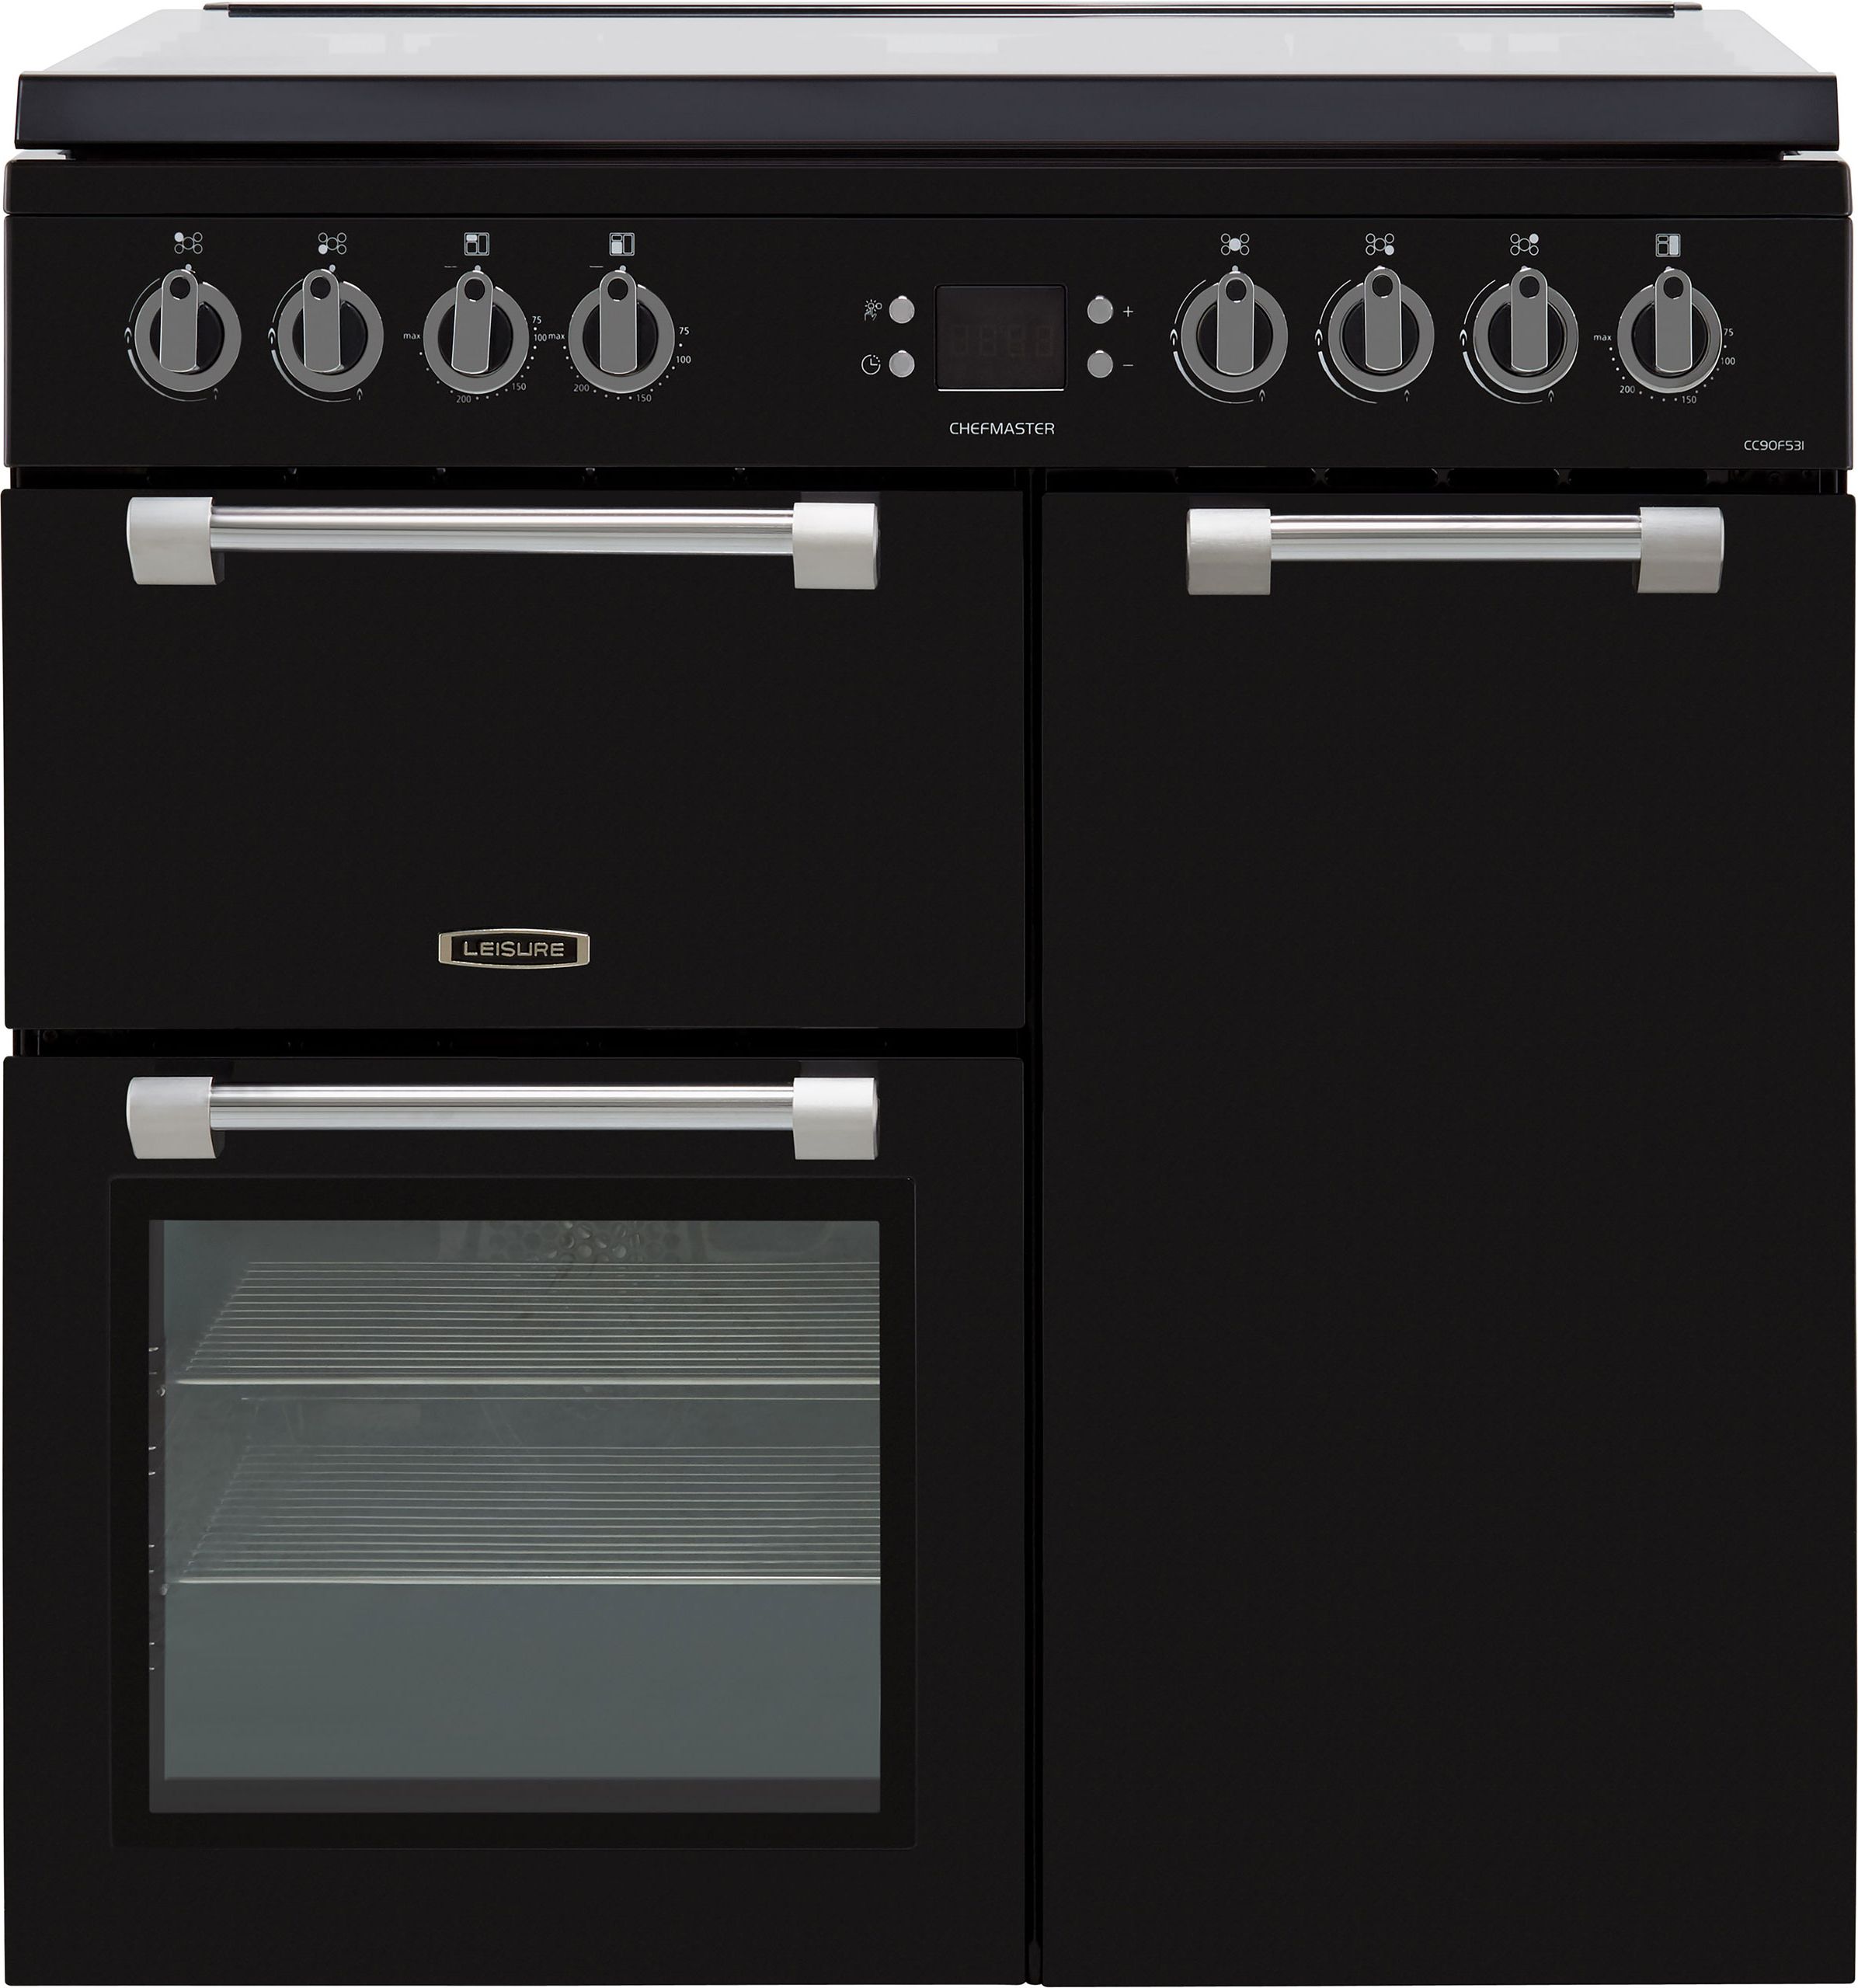 Leisure Chefmaster CC90F531K 90cm Dual Fuel Range Cooker - Black - A/A/A Rated, Black